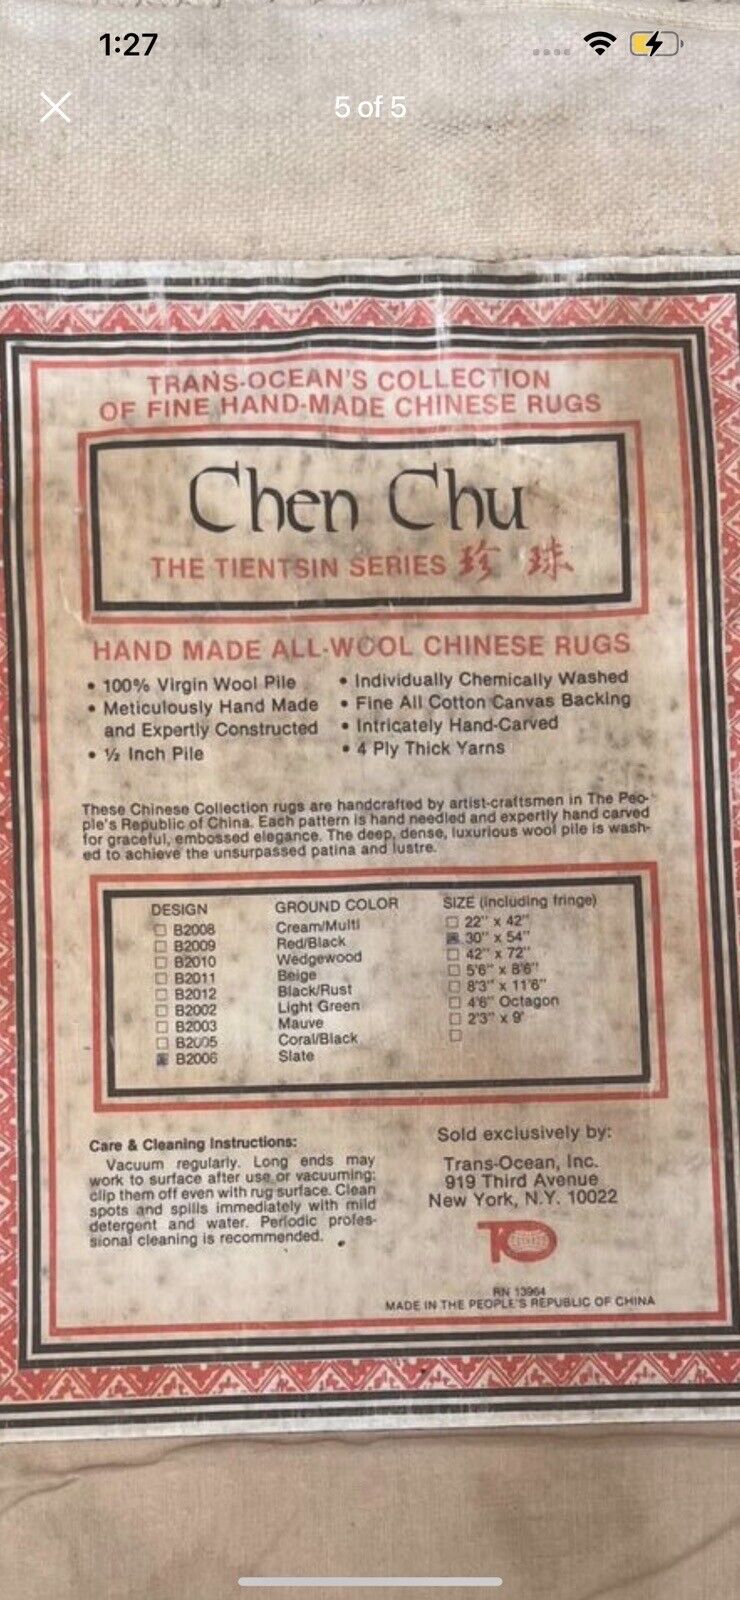 Great deal Chen Chu Rug Peoples Republic of China Oriental Rug Tientsin Series V